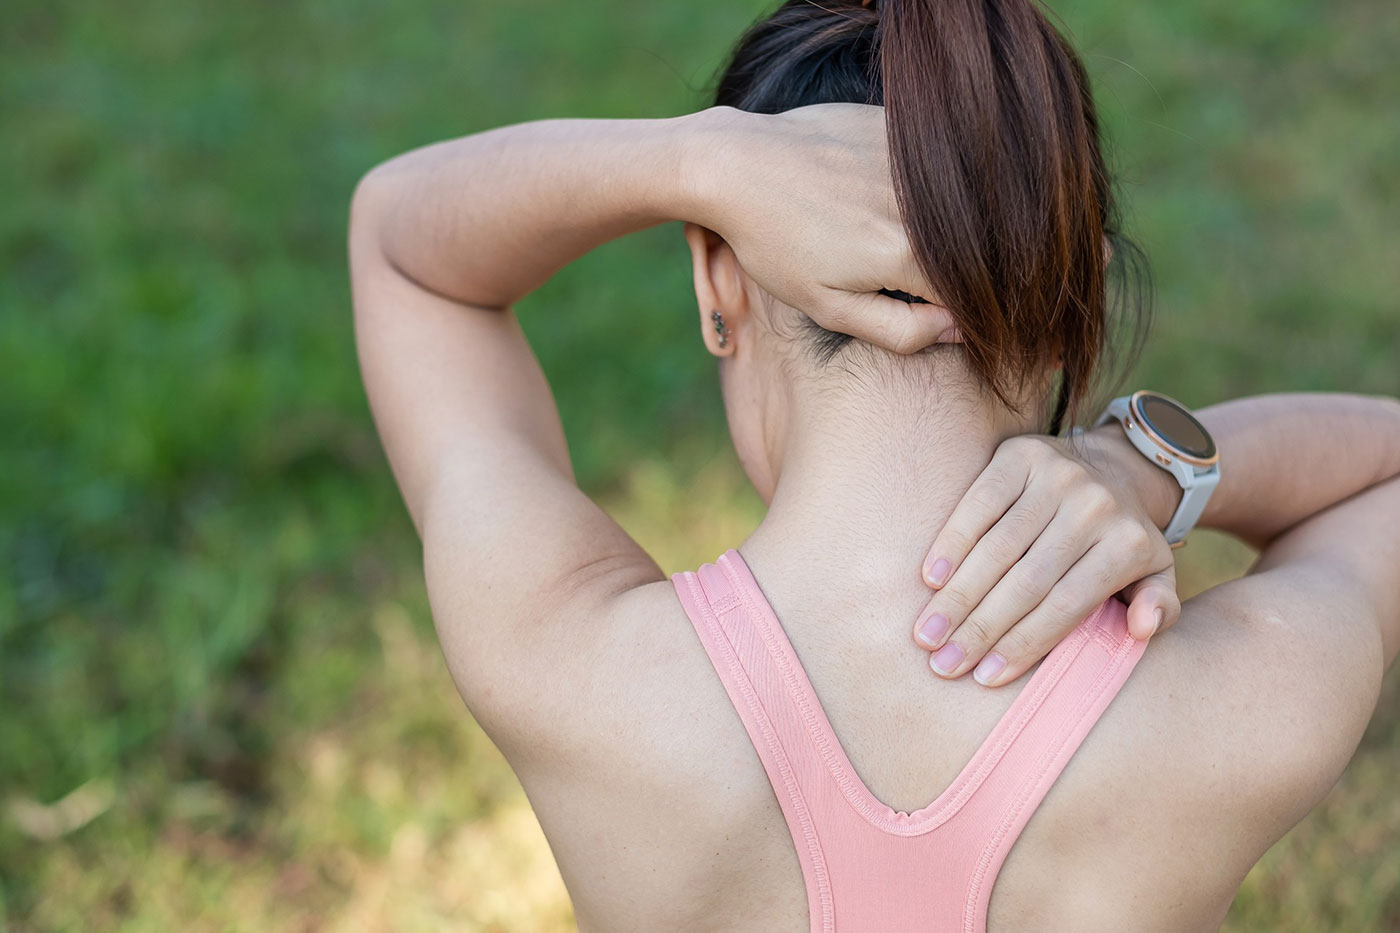 Do you suffer from neck pain?